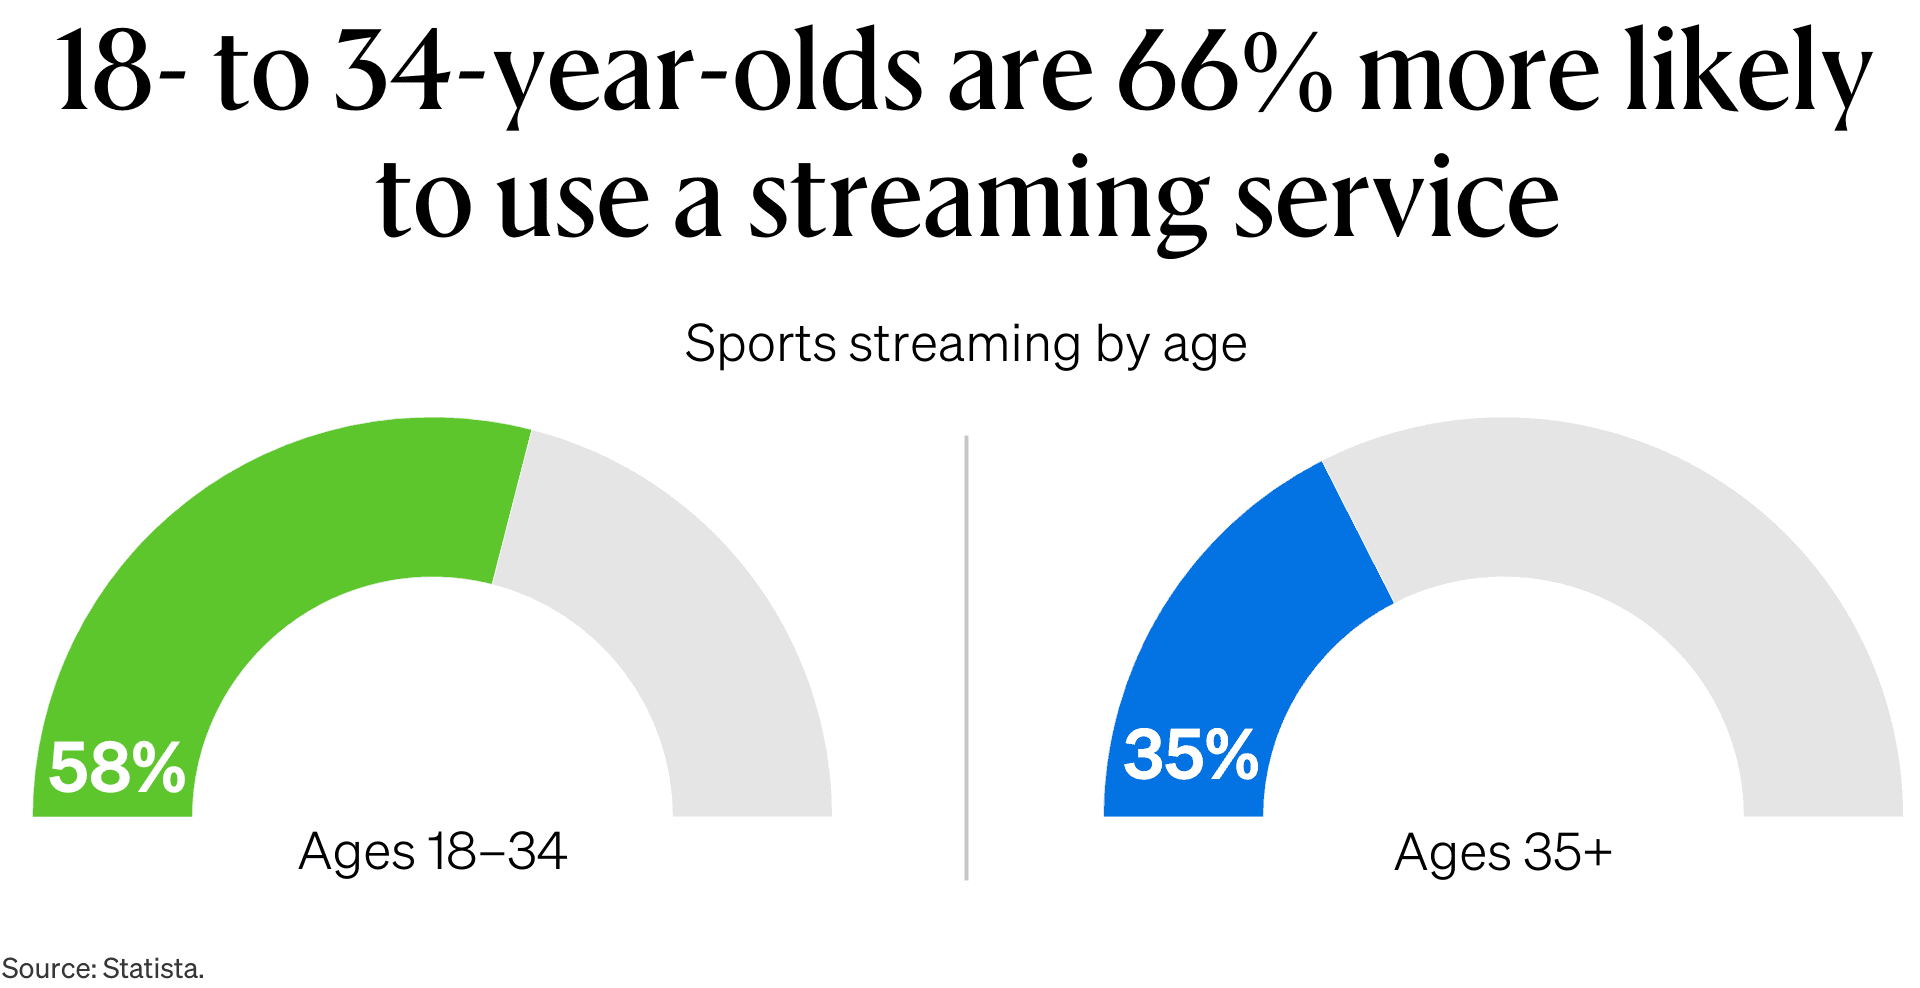 18-34 year olds are 66% more likely to use a streaming service graph.